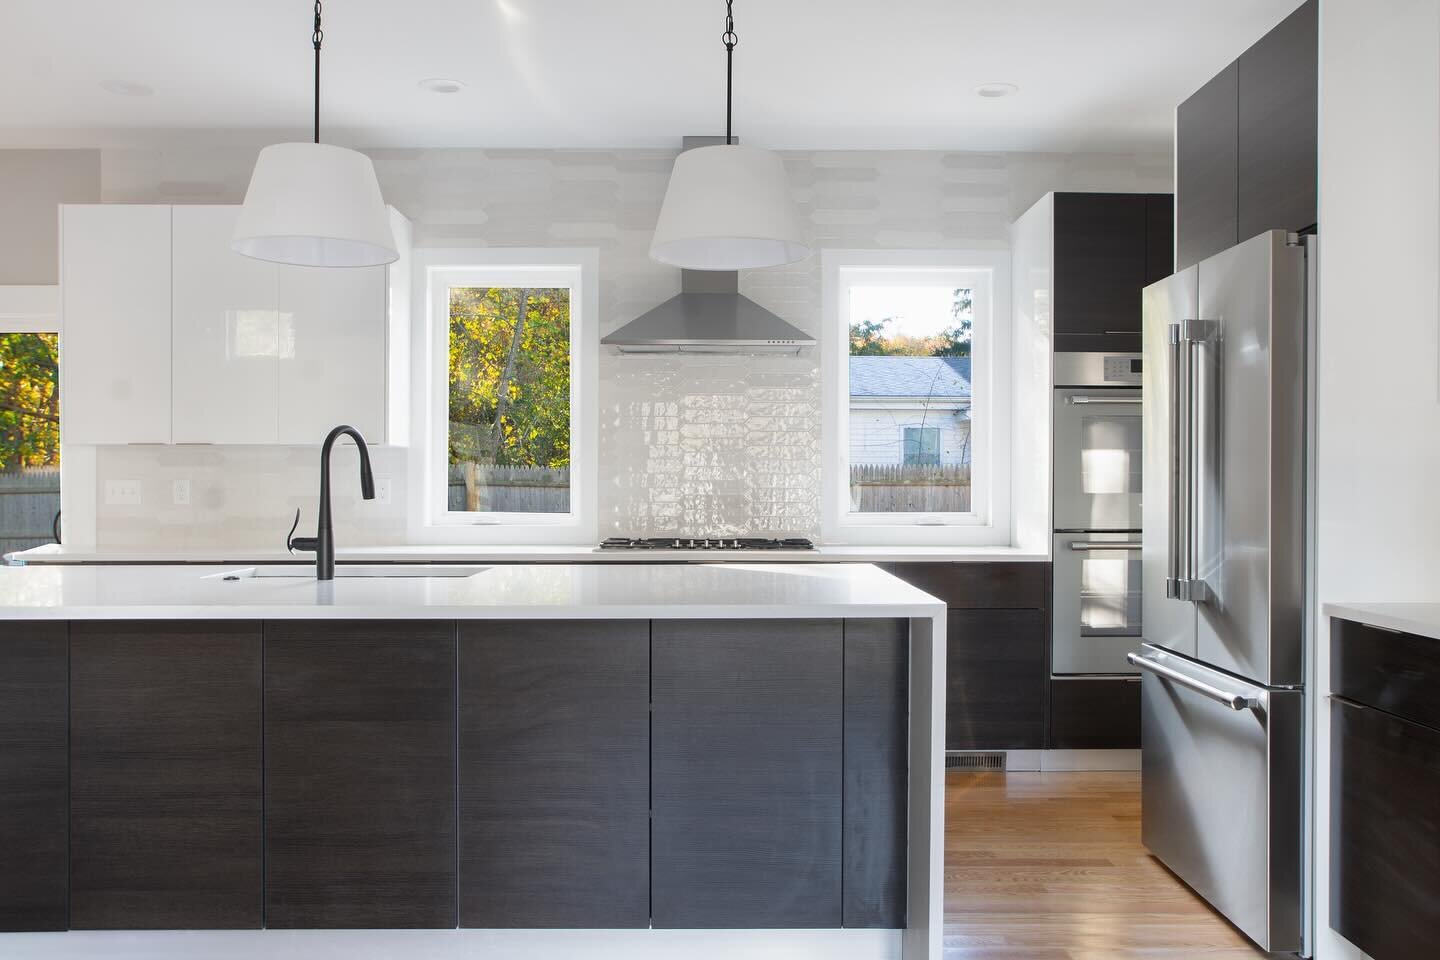 The 1st floor at 1 Liberty St&hellip;. @vnardonerealestate 

Gorgeous Contemporary New Construction at 1 Liberty St in Natick!

Swipe left! 

#newconstruction #kitchen #kitchendesign #modernkitchen #contemporary #contemporarykitchen #homedesign #home